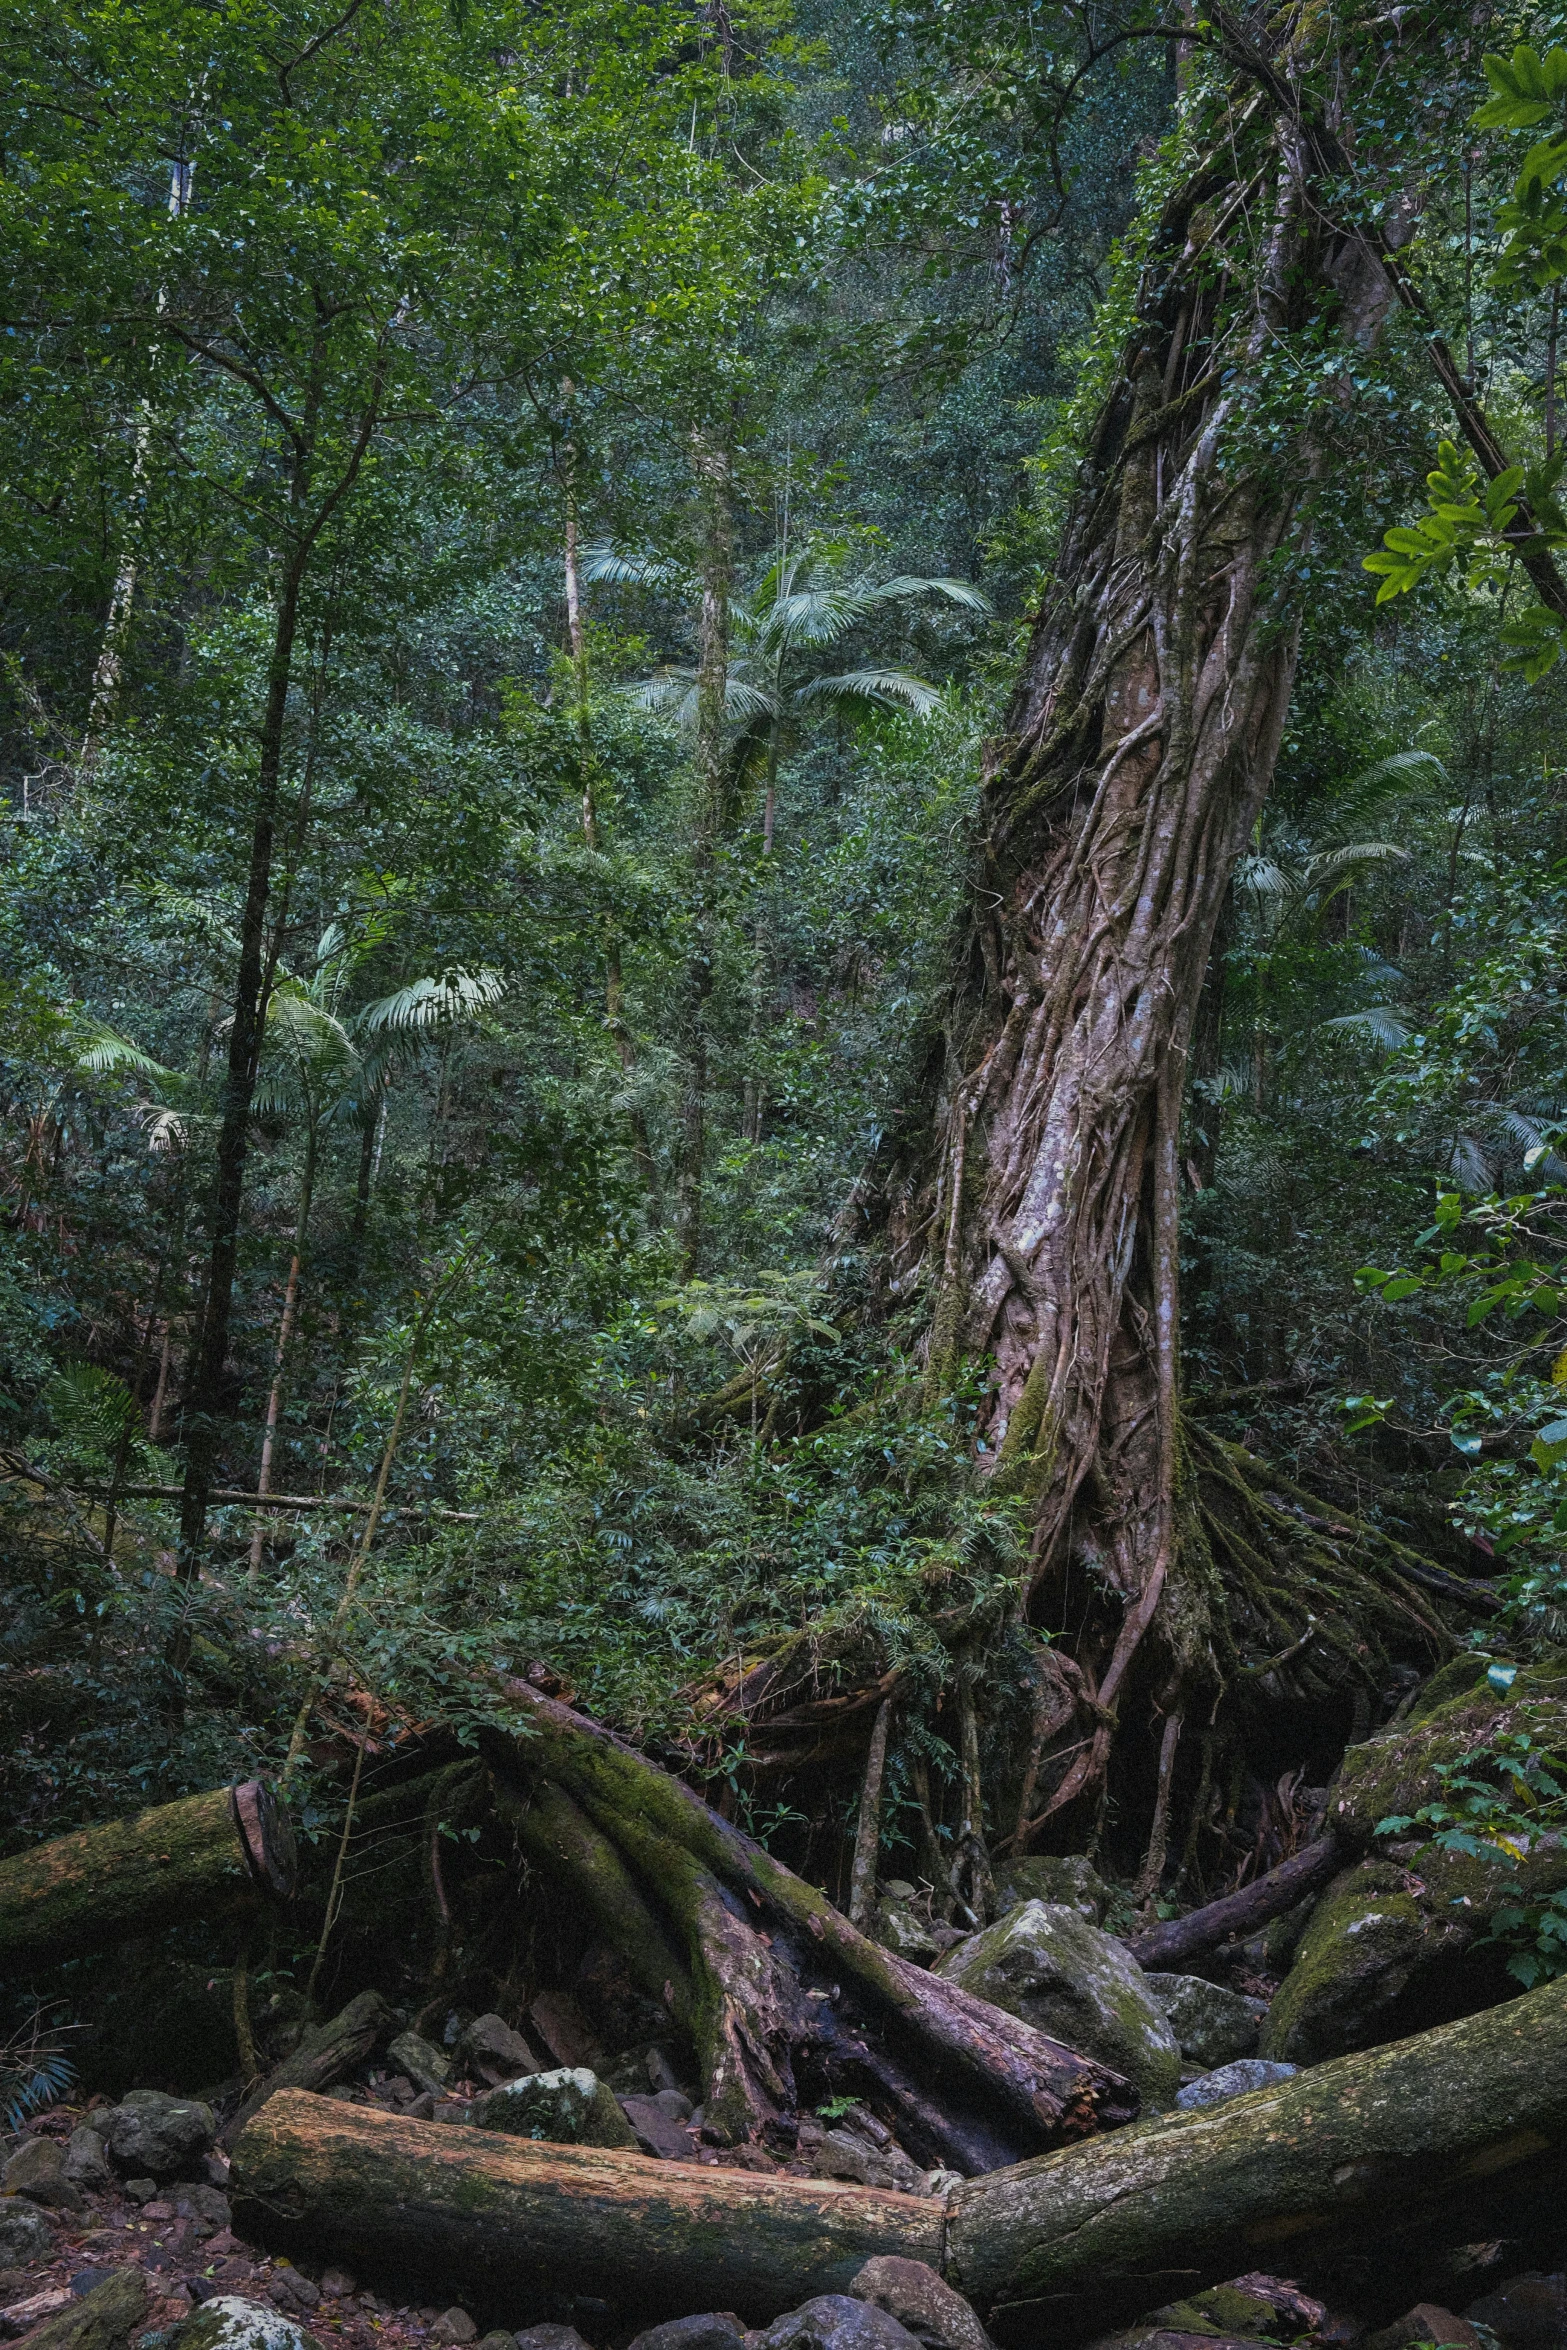 a fire hydrant sitting in the middle of a forest, an album cover, unsplash contest winner, australian tonalism, buttress tree roots, wet lush jungle landscape, massive wide trunk, as seen from the canopy